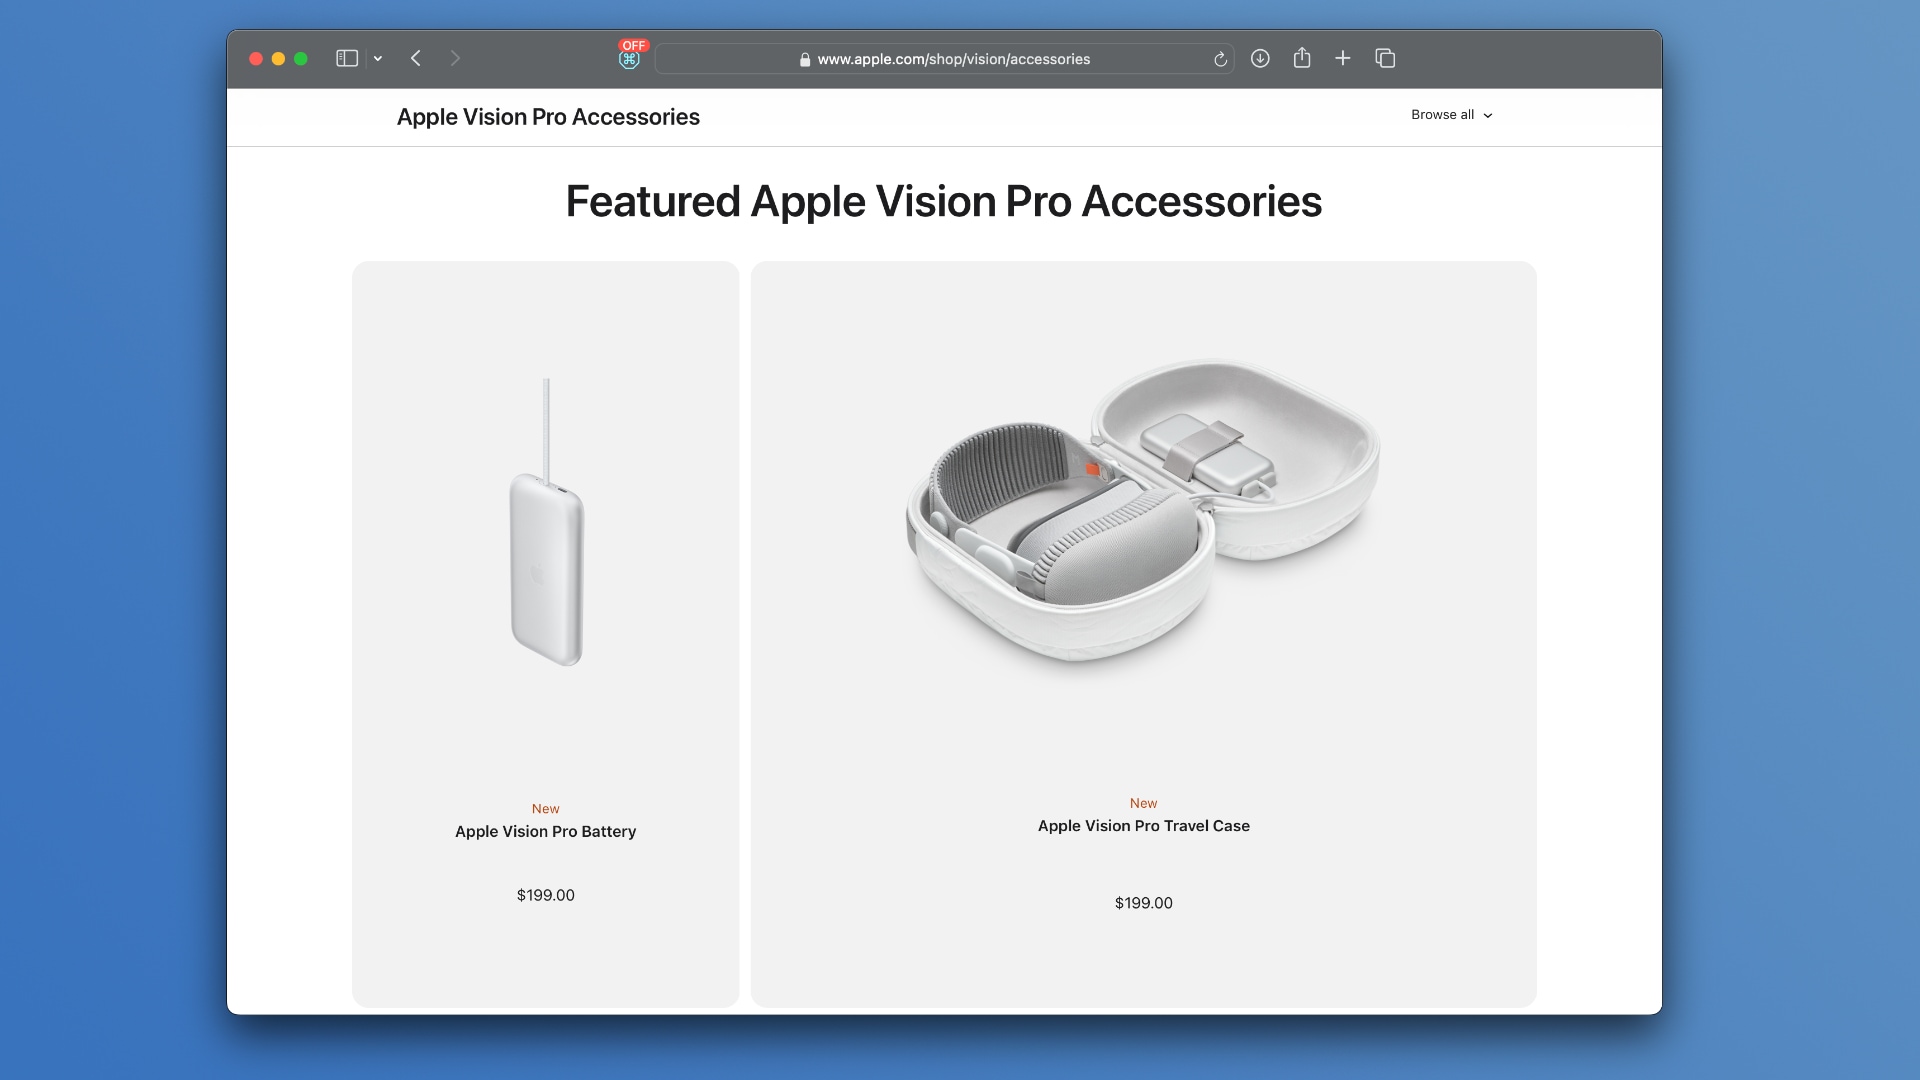 Apple's website showcasing featured Vision Pro accessories